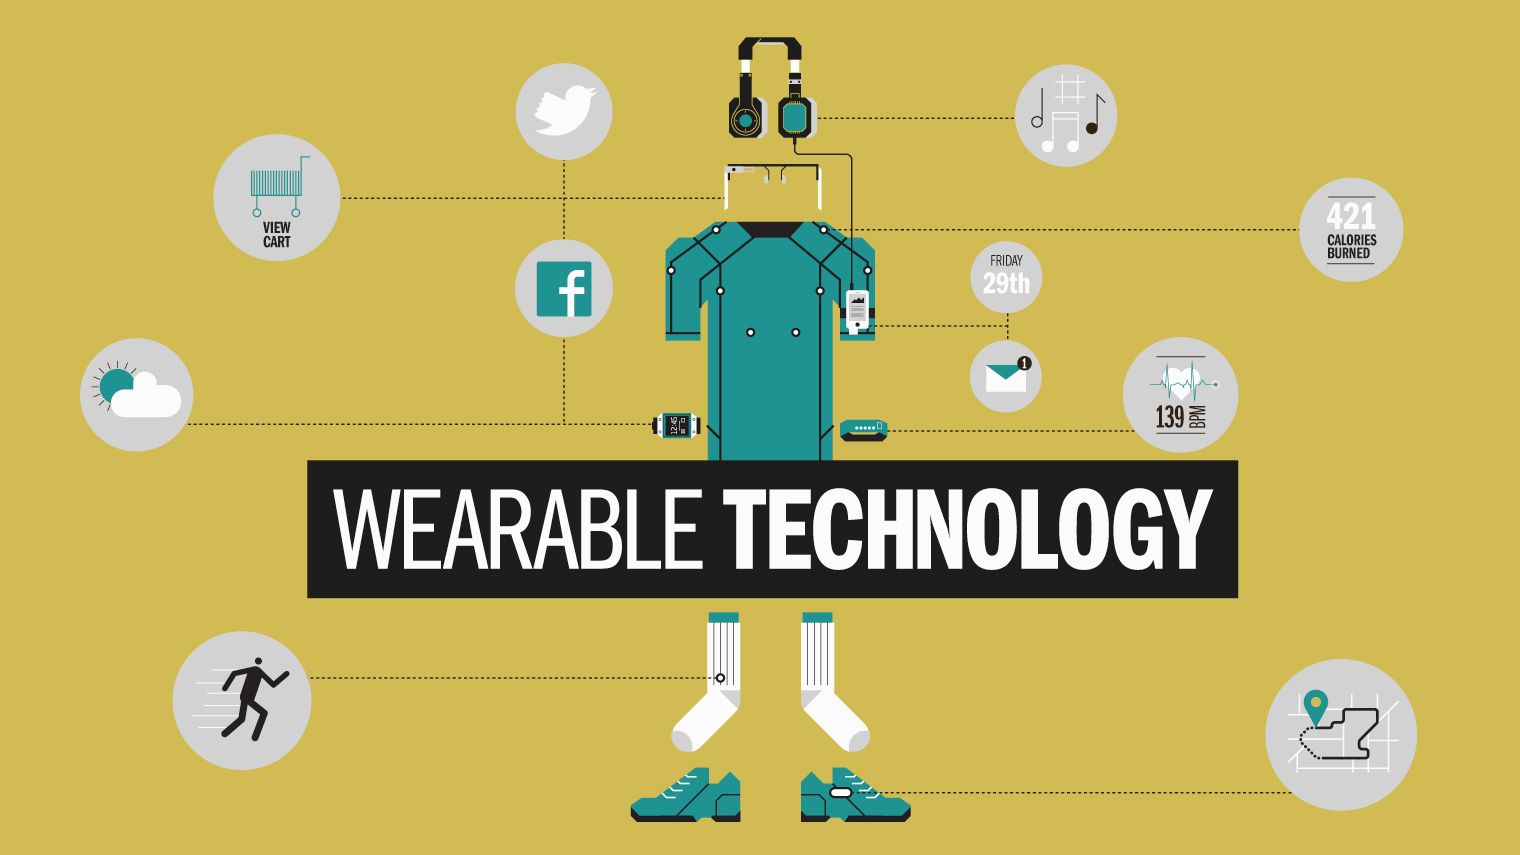 The power of wearables: are they helping us?